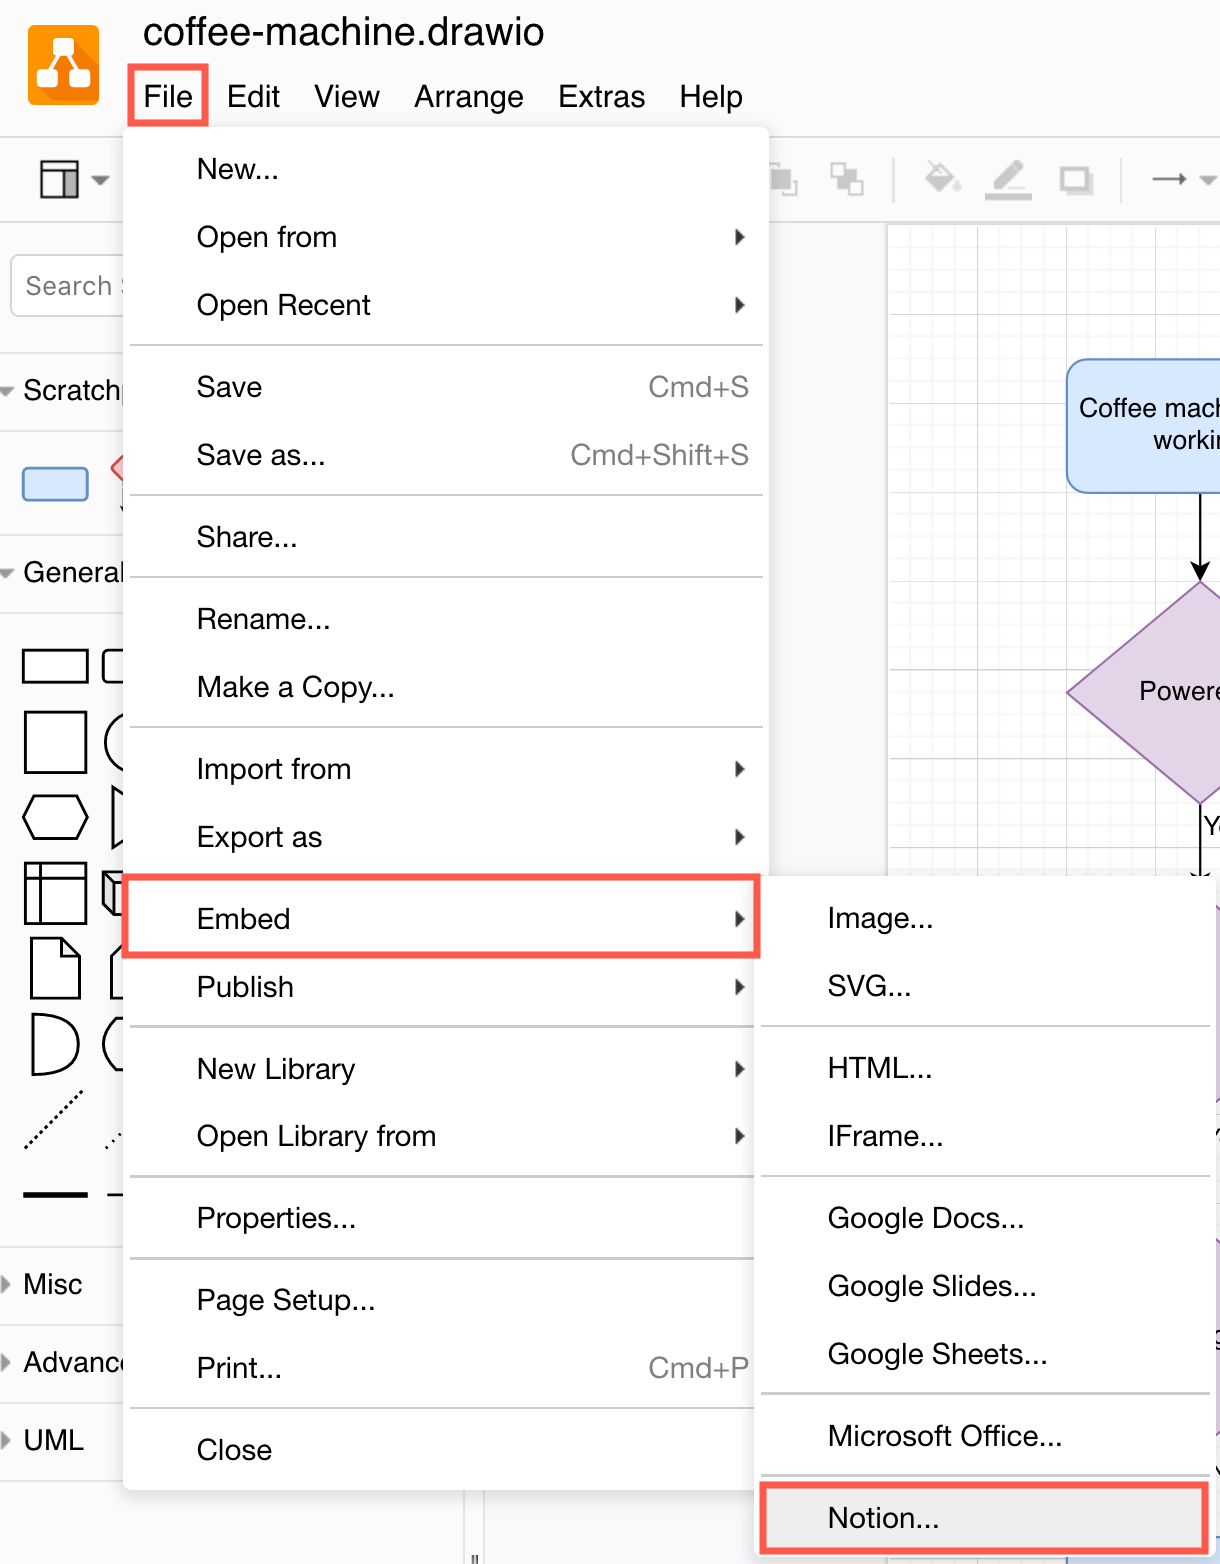 Click File > Embed > Notion to generate the embed code for embedding a diagram in Notion